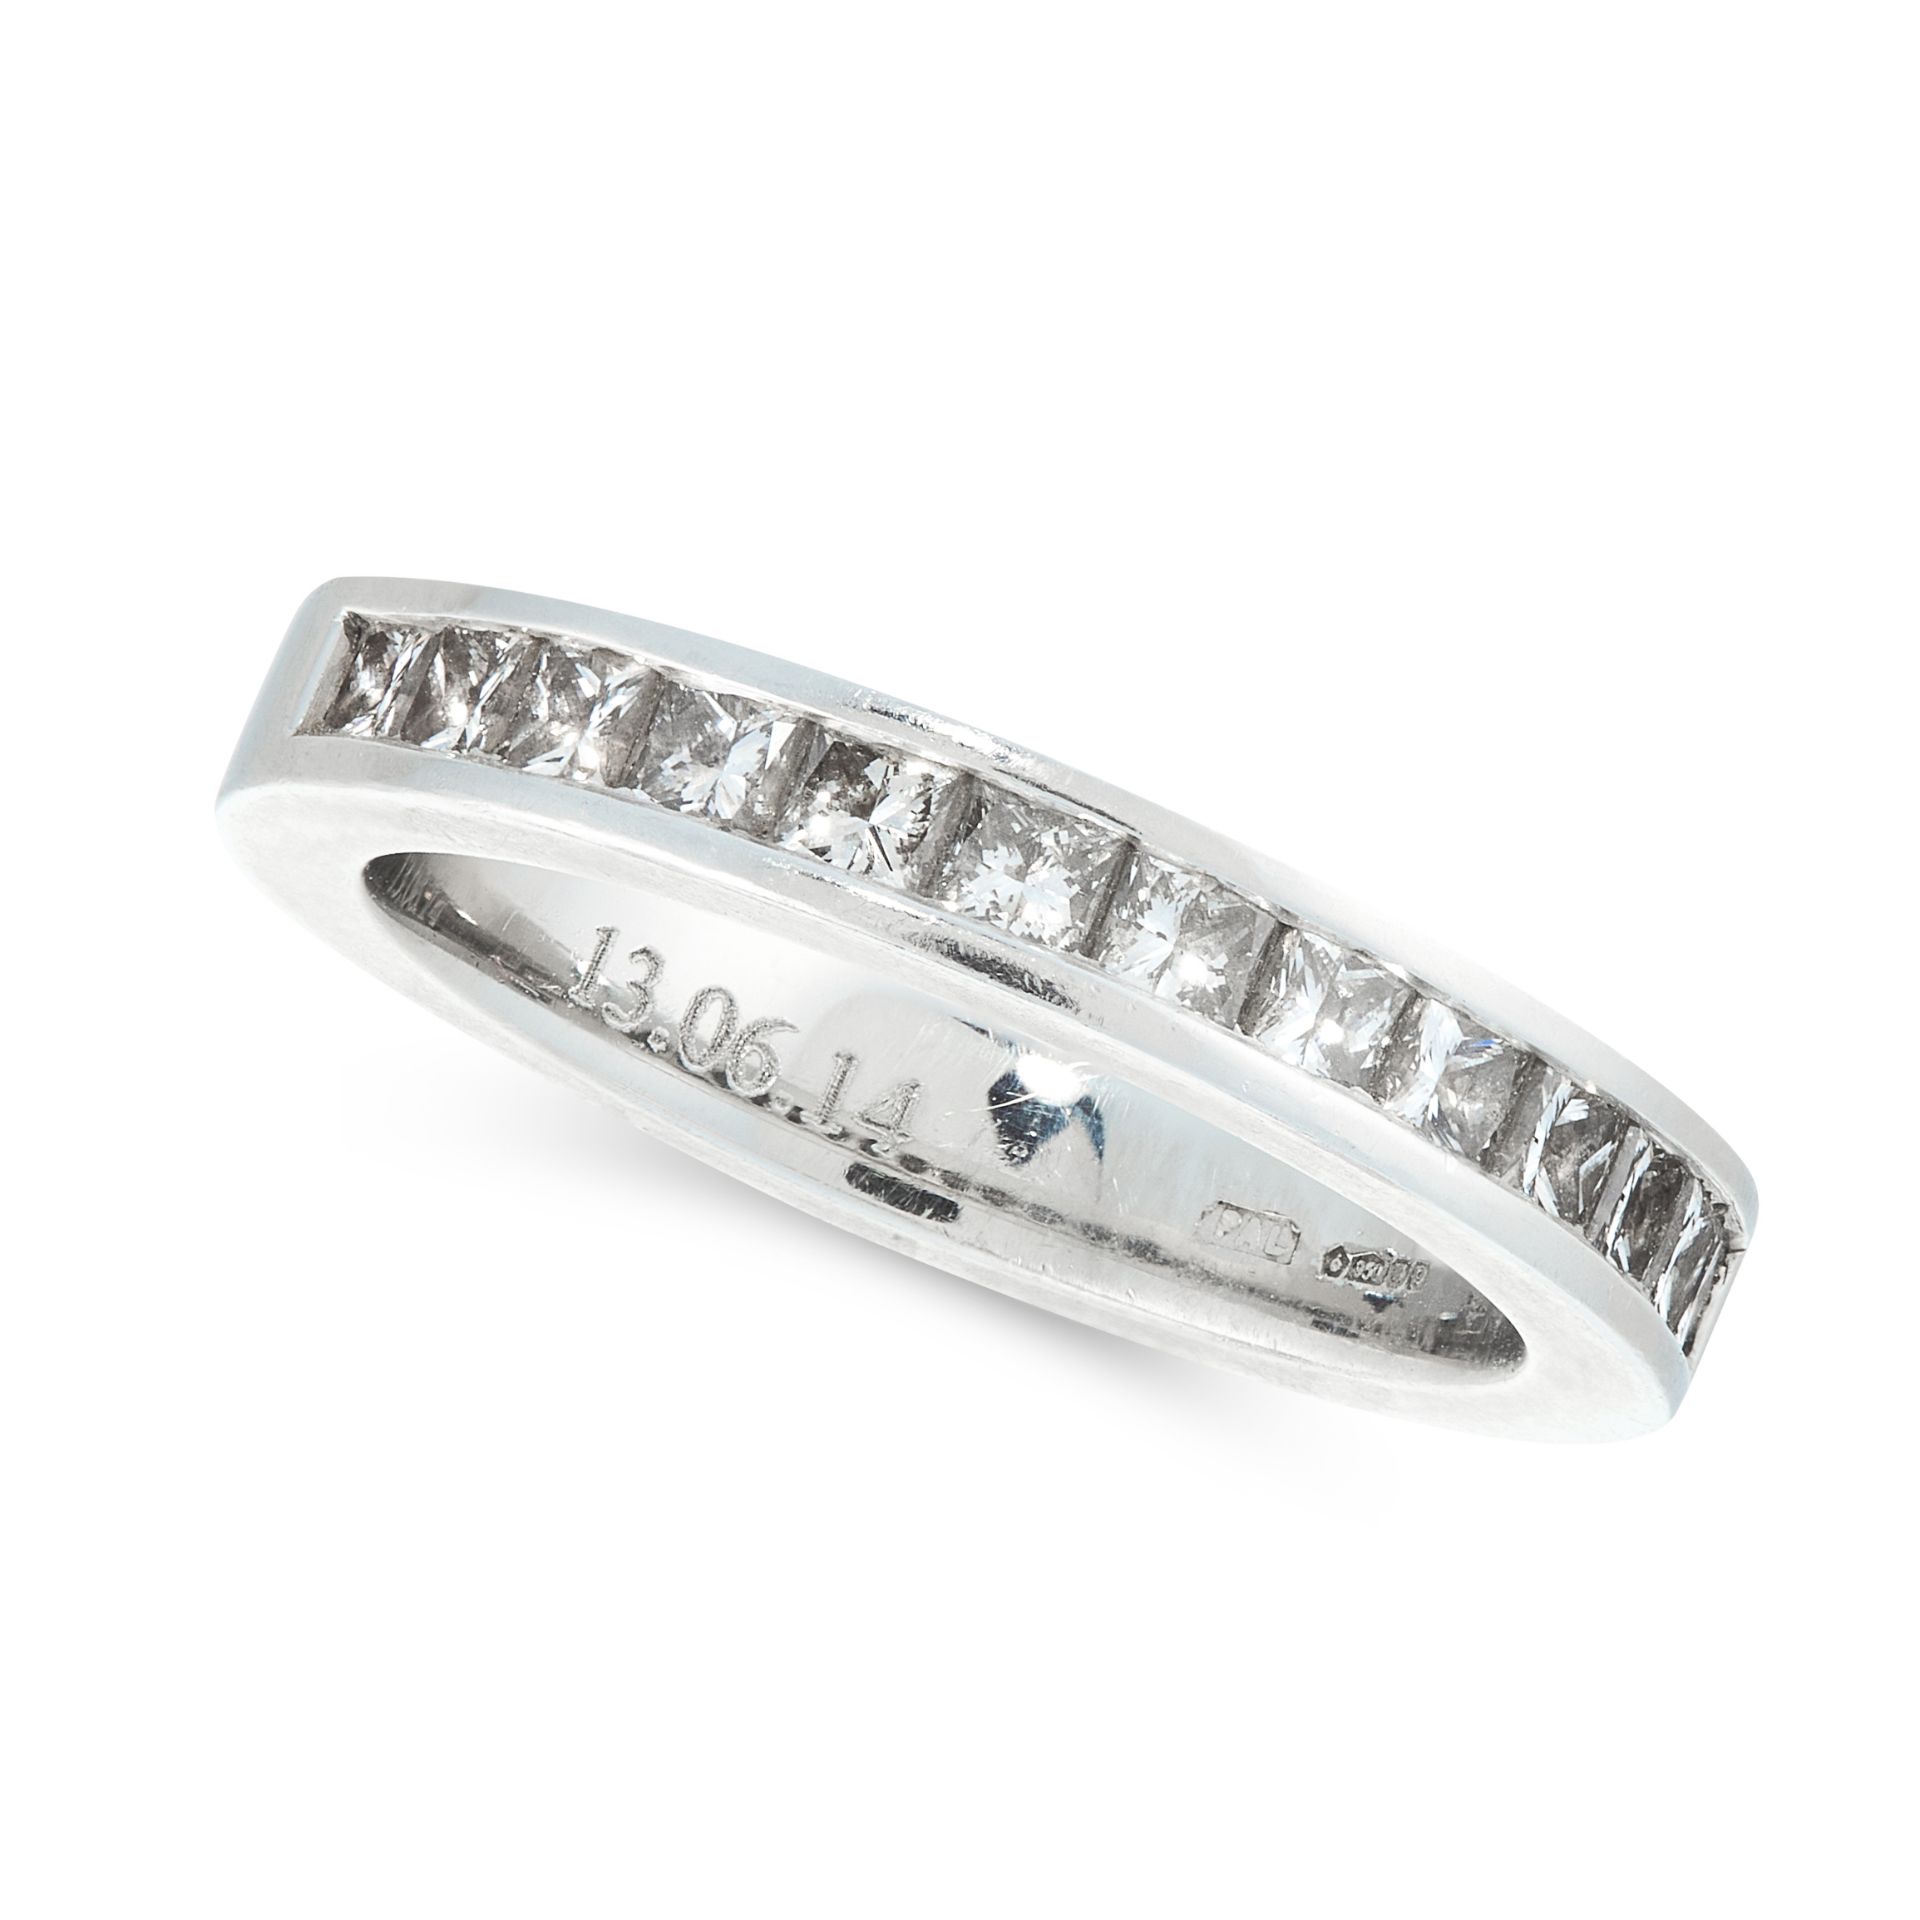 DIAMOND ETERNITY RING in platinum, the band designed as a half eternity, channel set with princess